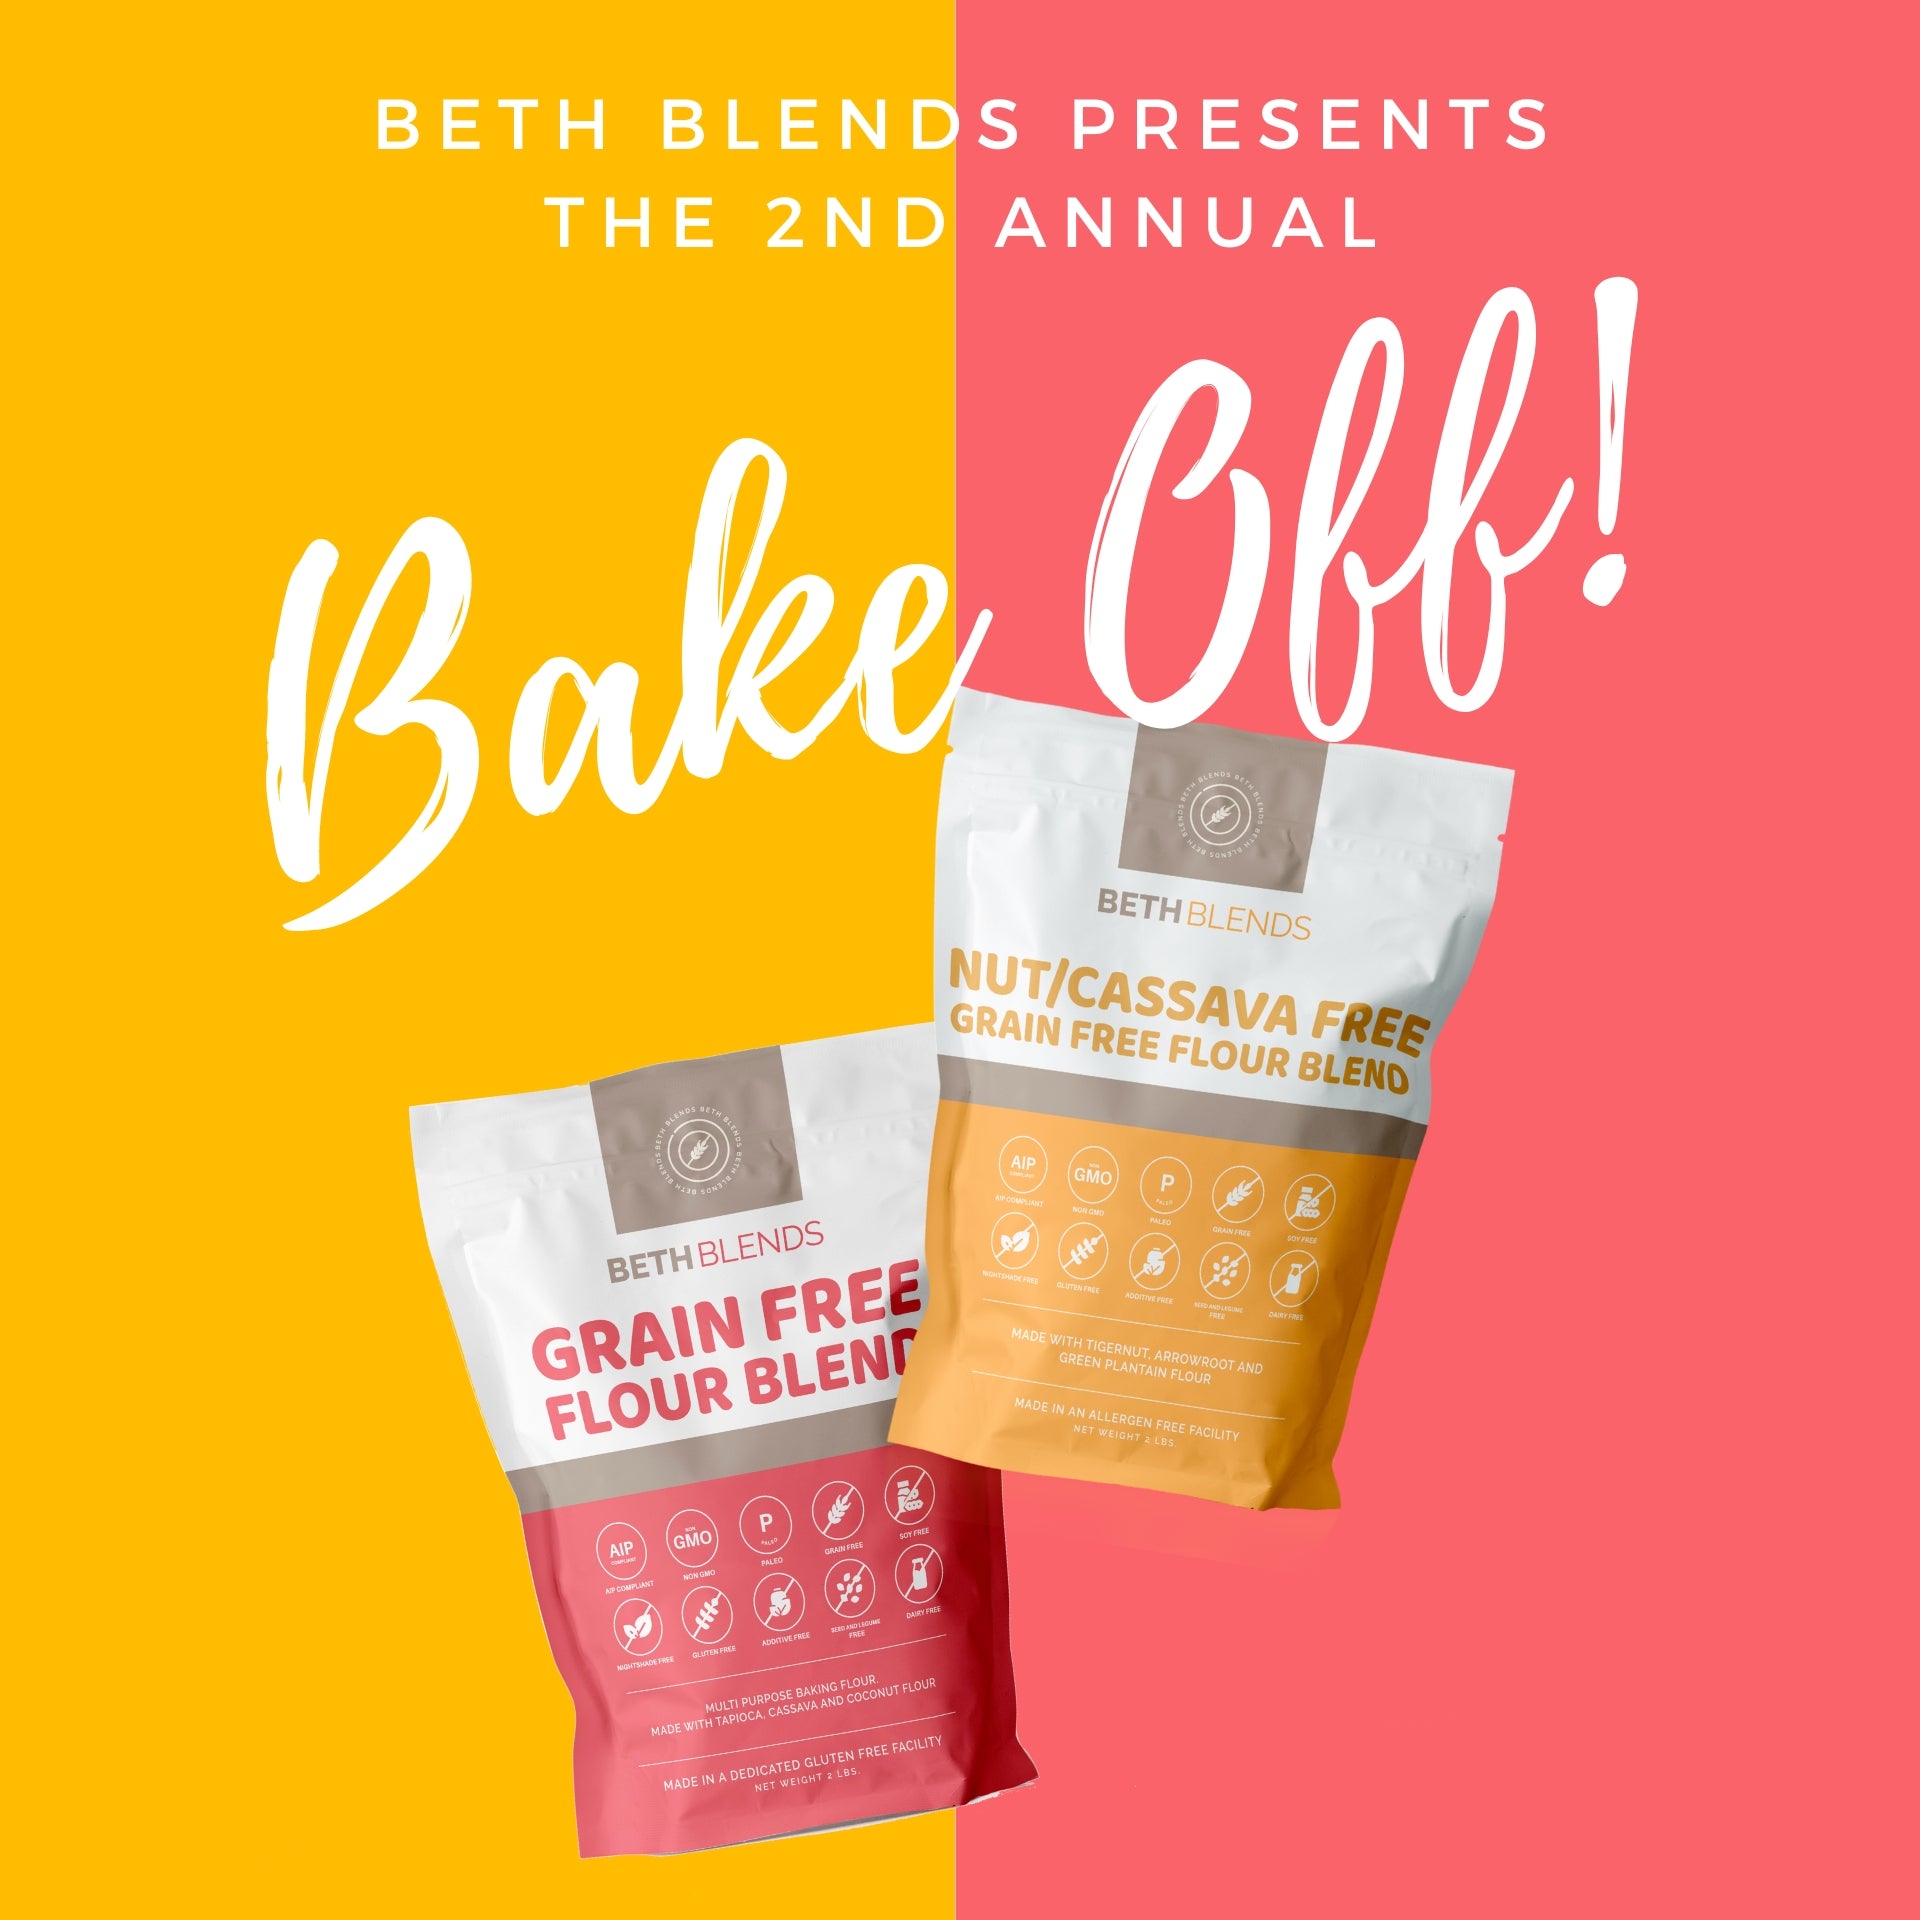 The Second Annual Beth Blends Bake Off 2023